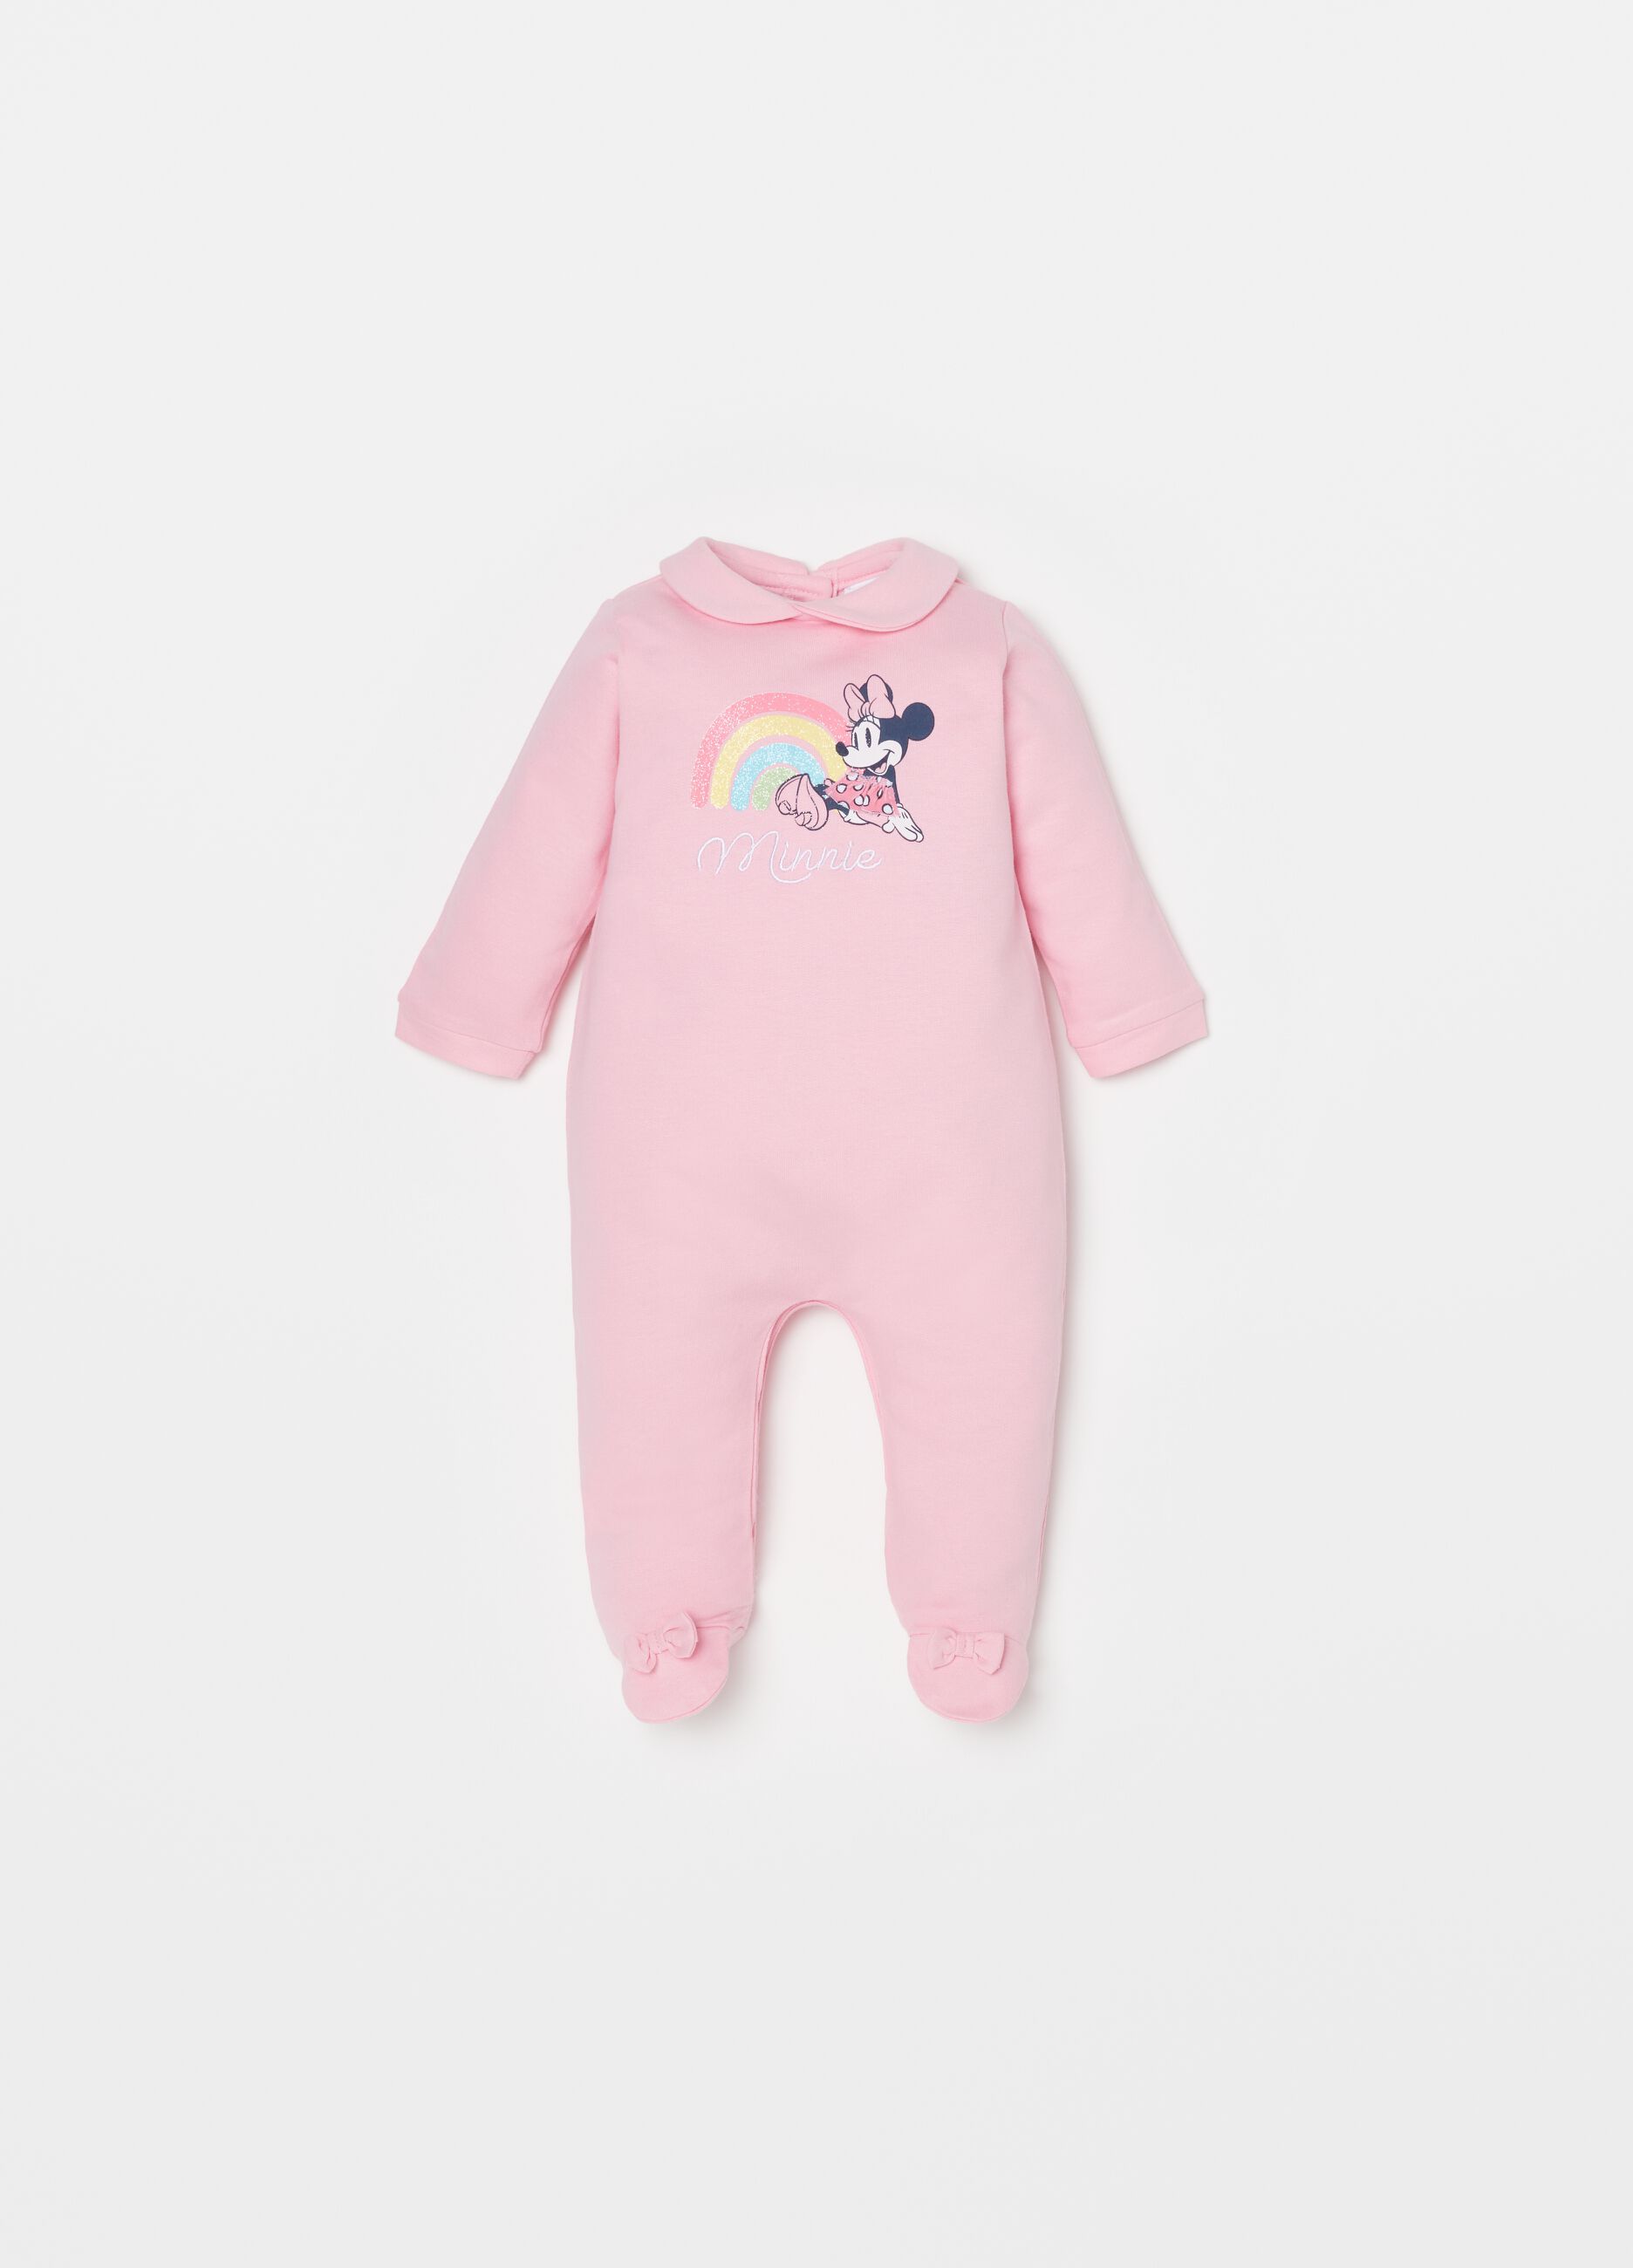 100% cotton onesie with Minnie Mouse bows